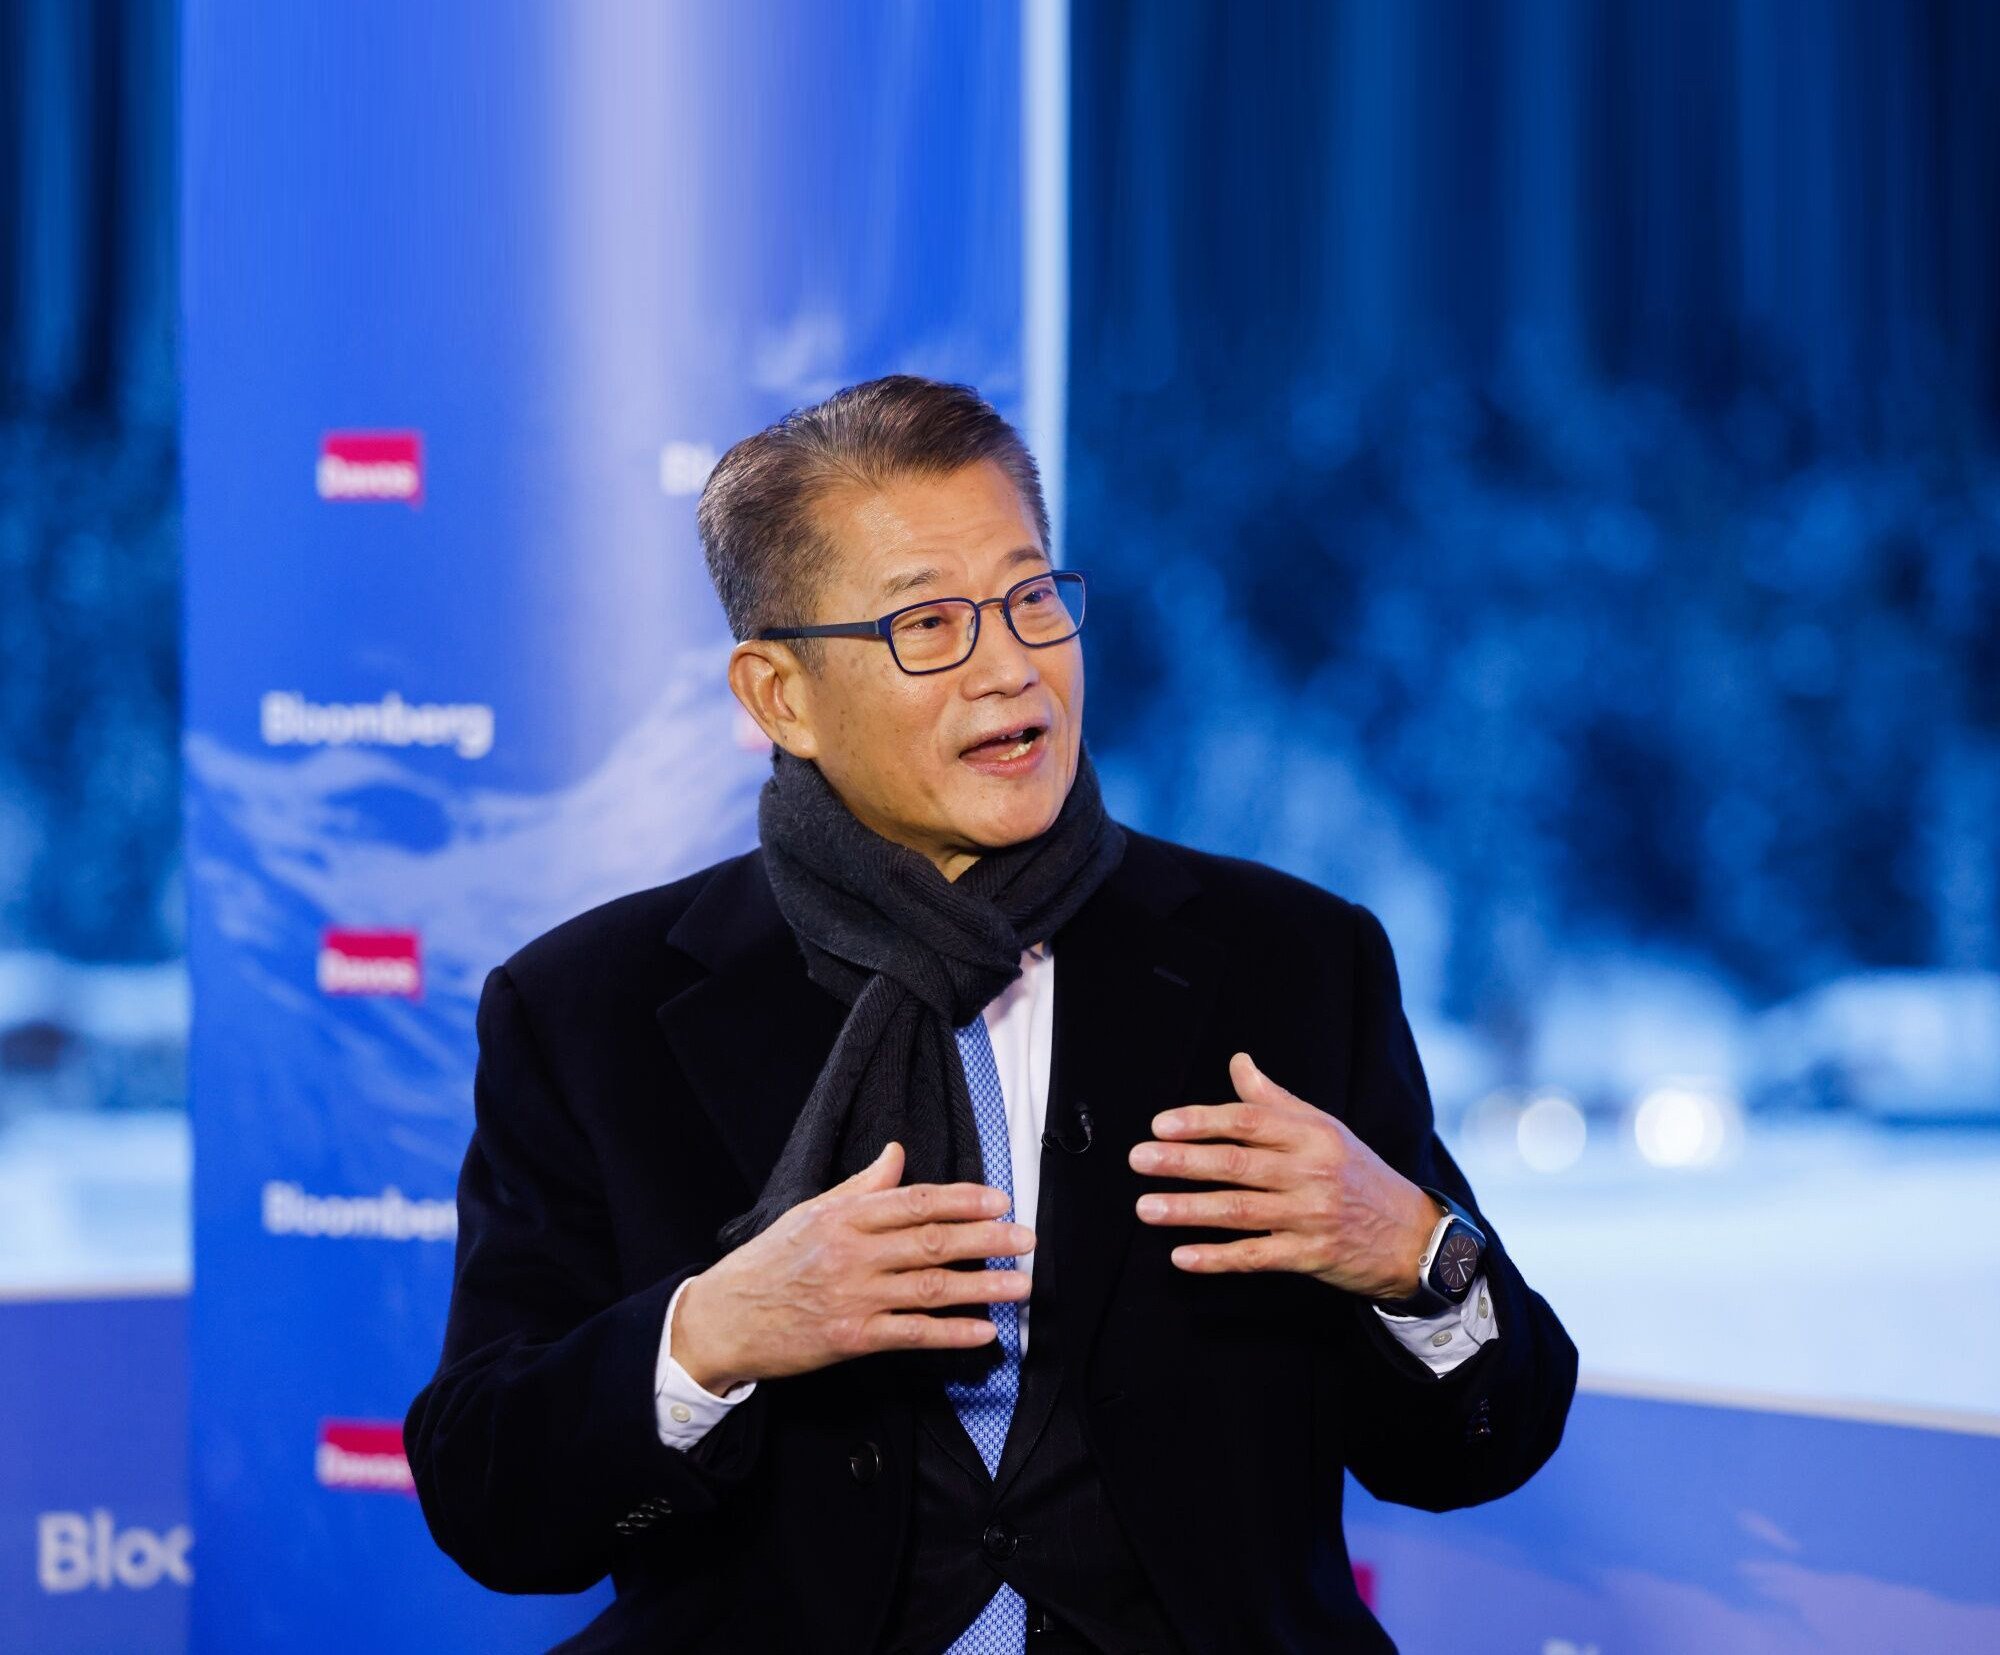 Hong Kong finance chief Paul Chan attends the World Economic Forum in Davos, Switzerland. He stressed that his discussion with leaders remained focused on business opportunities. Photo: Bloomberg